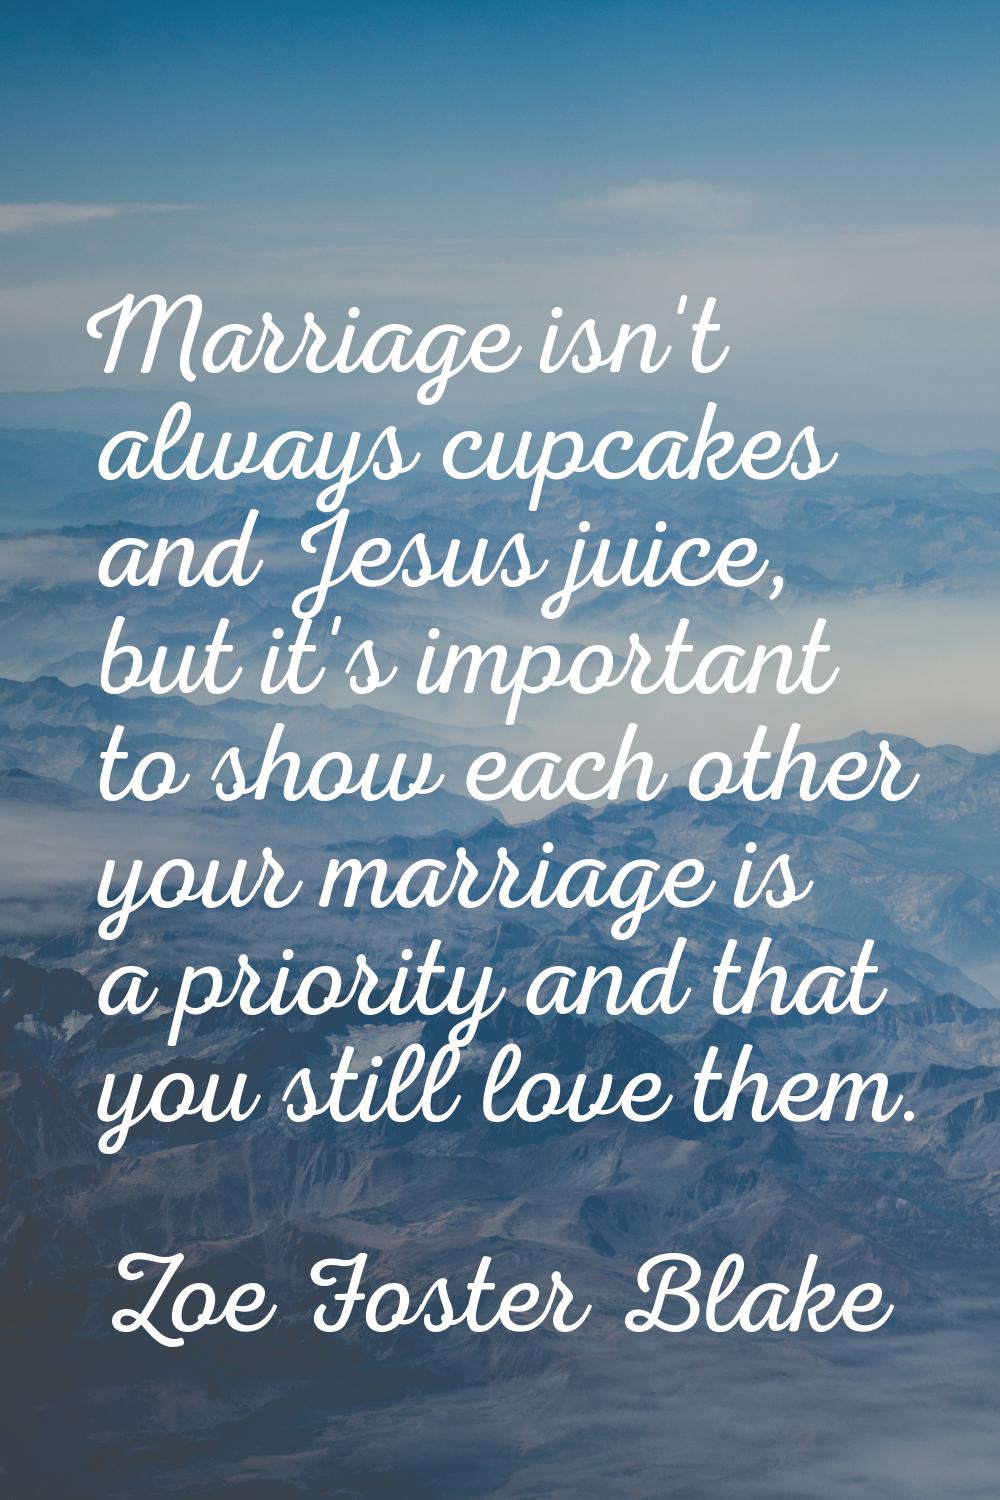 Marriage isn't always cupcakes and Jesus juice, but it's important to show each other your marriage